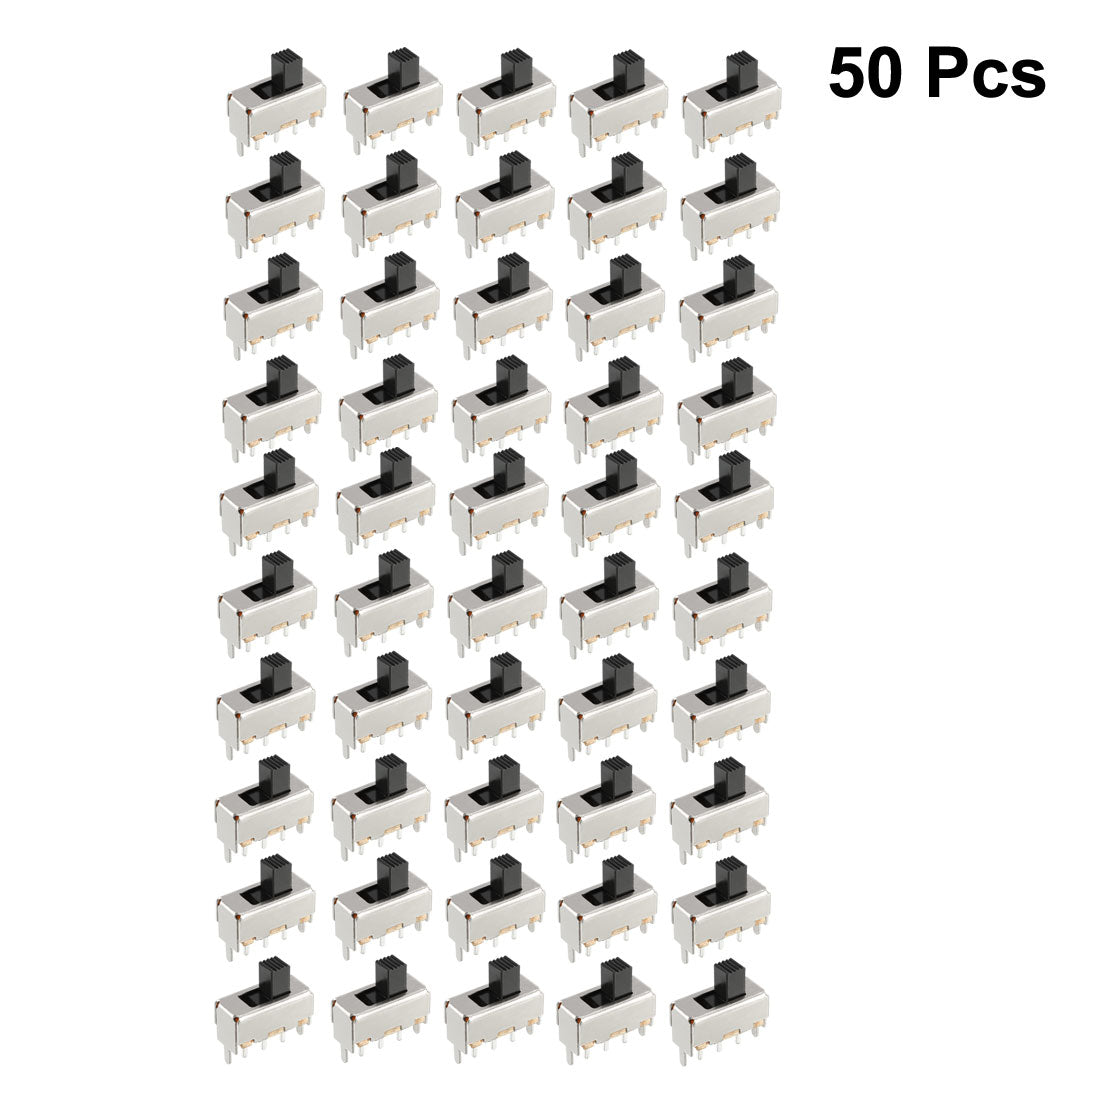 uxcell Uxcell 50Pcs 3mm Vertical Slide Switch SPDT 1P2T 3 Pins PCB Panel Latching